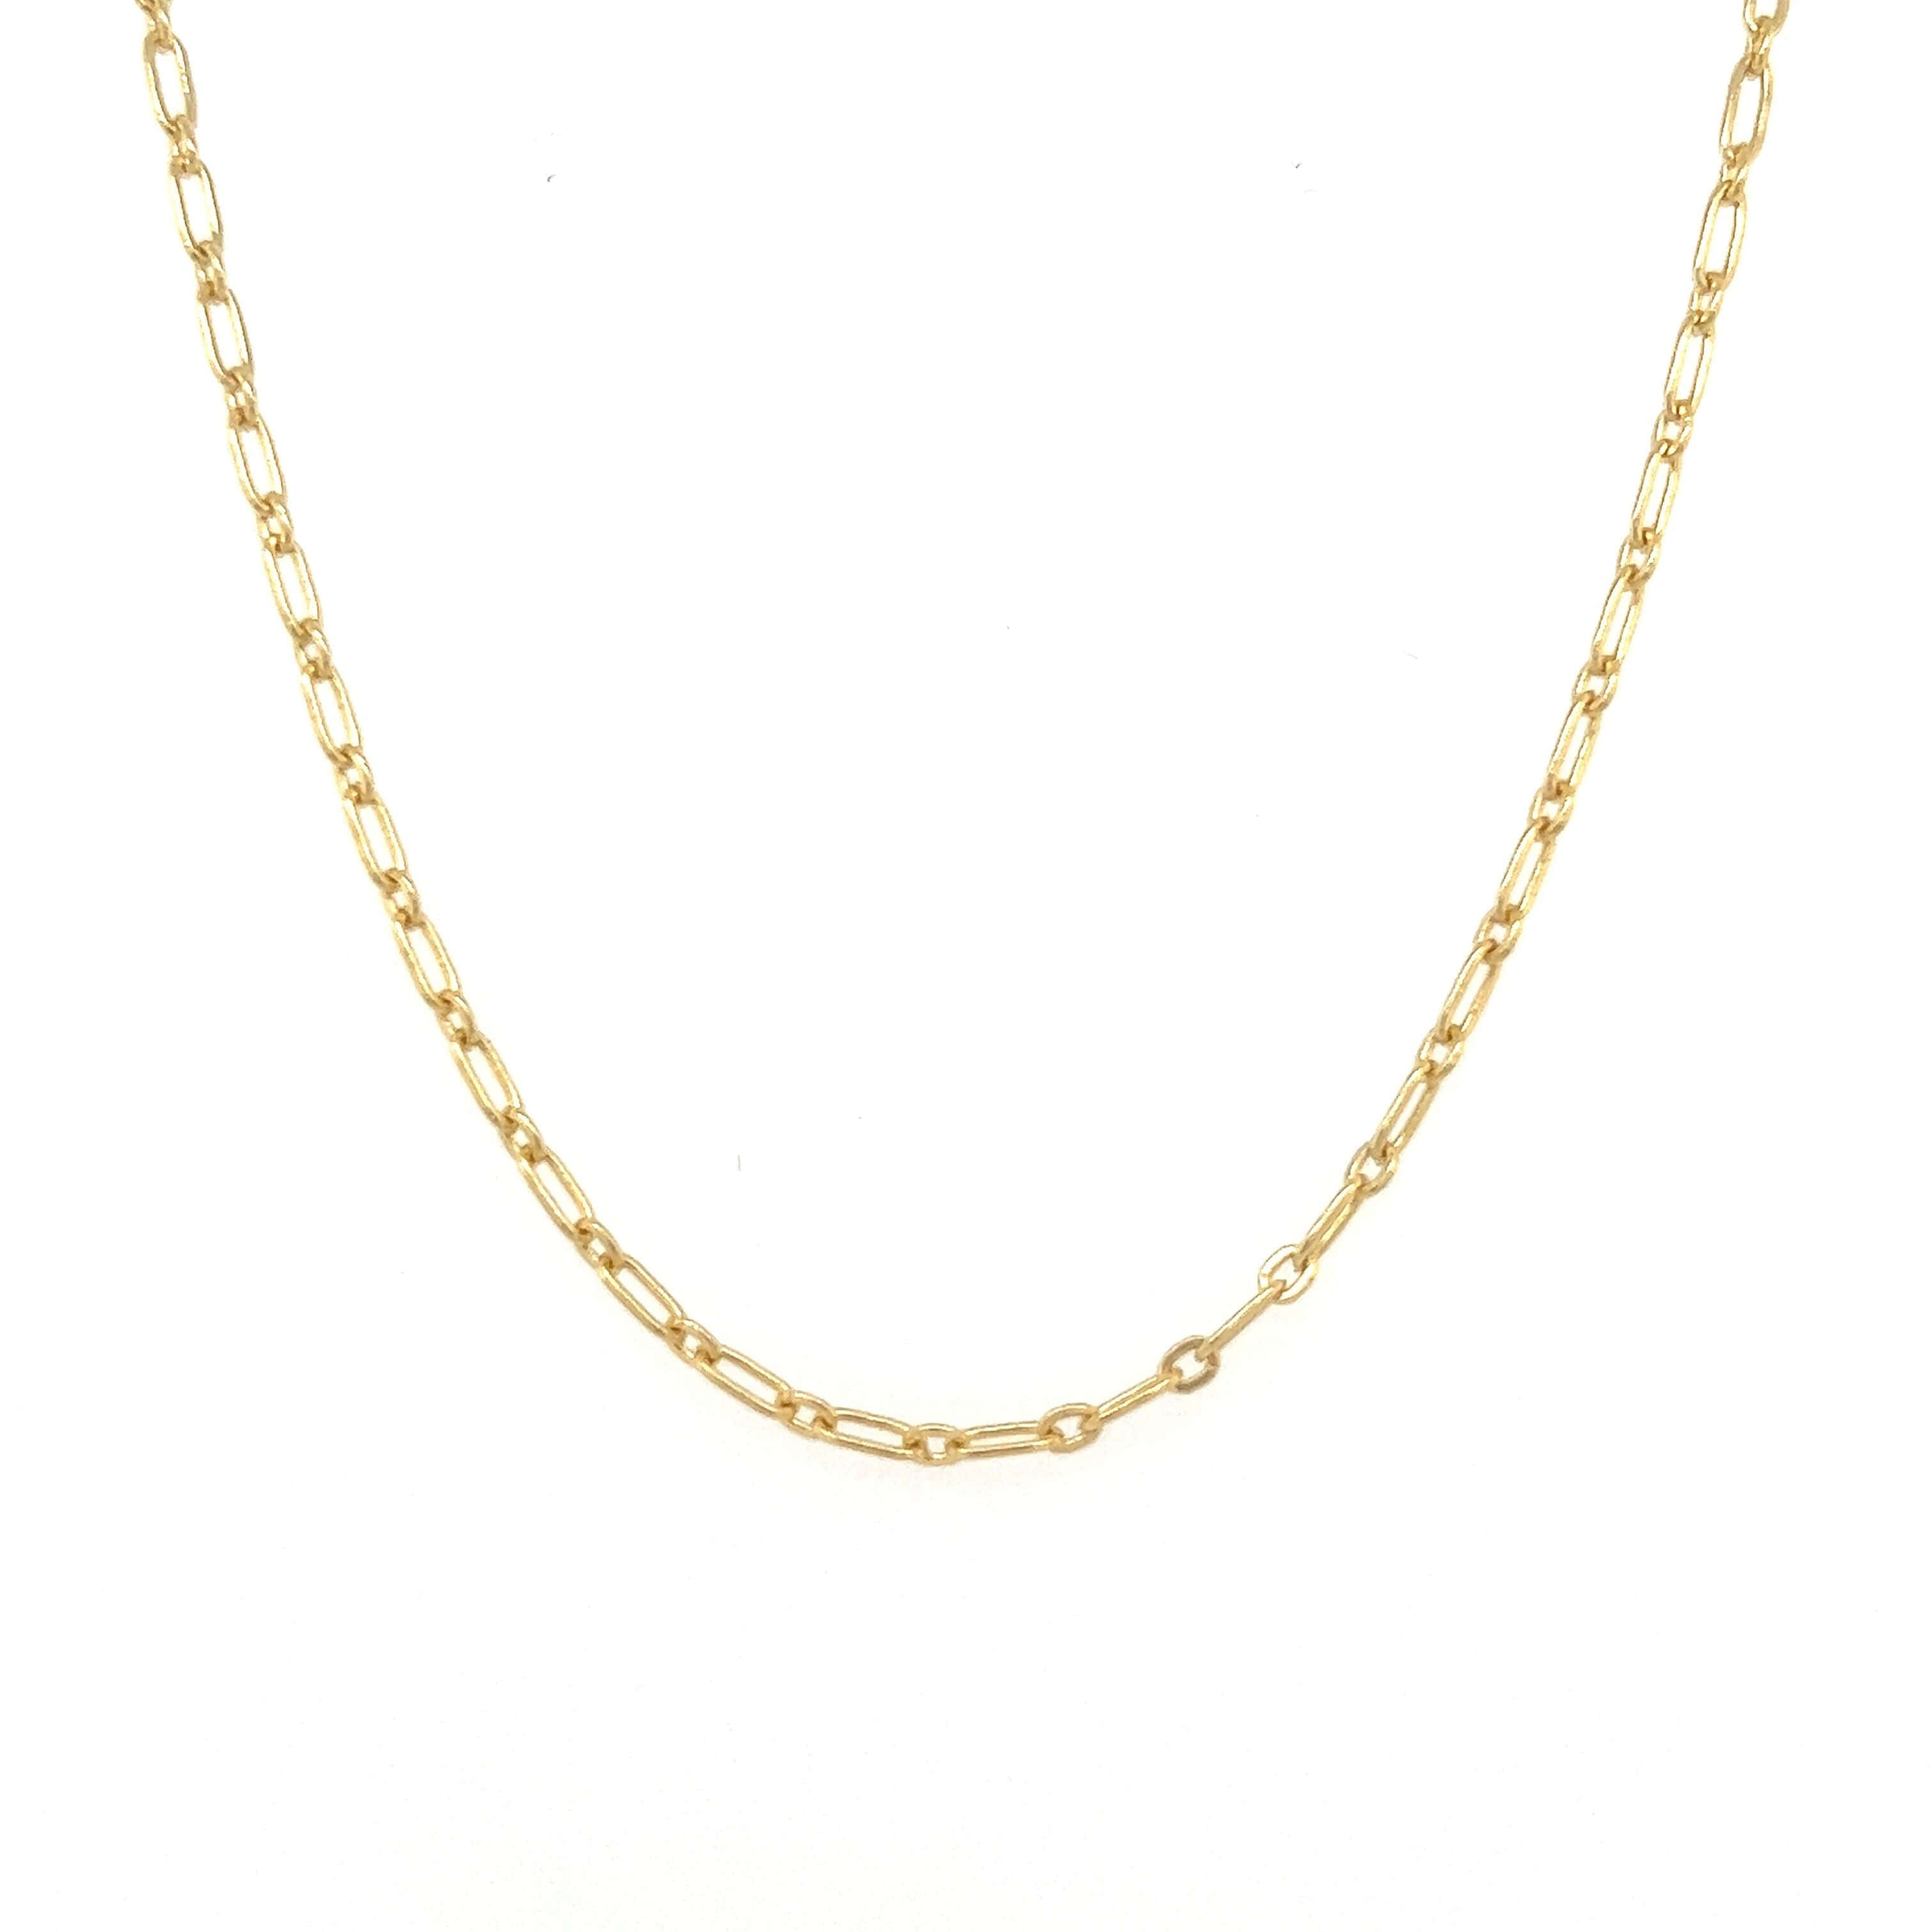 14K Gold Mixed Rolo Cable Link Chain Necklace - Necklaces - Izakov Diamonds + Fine Jewelry